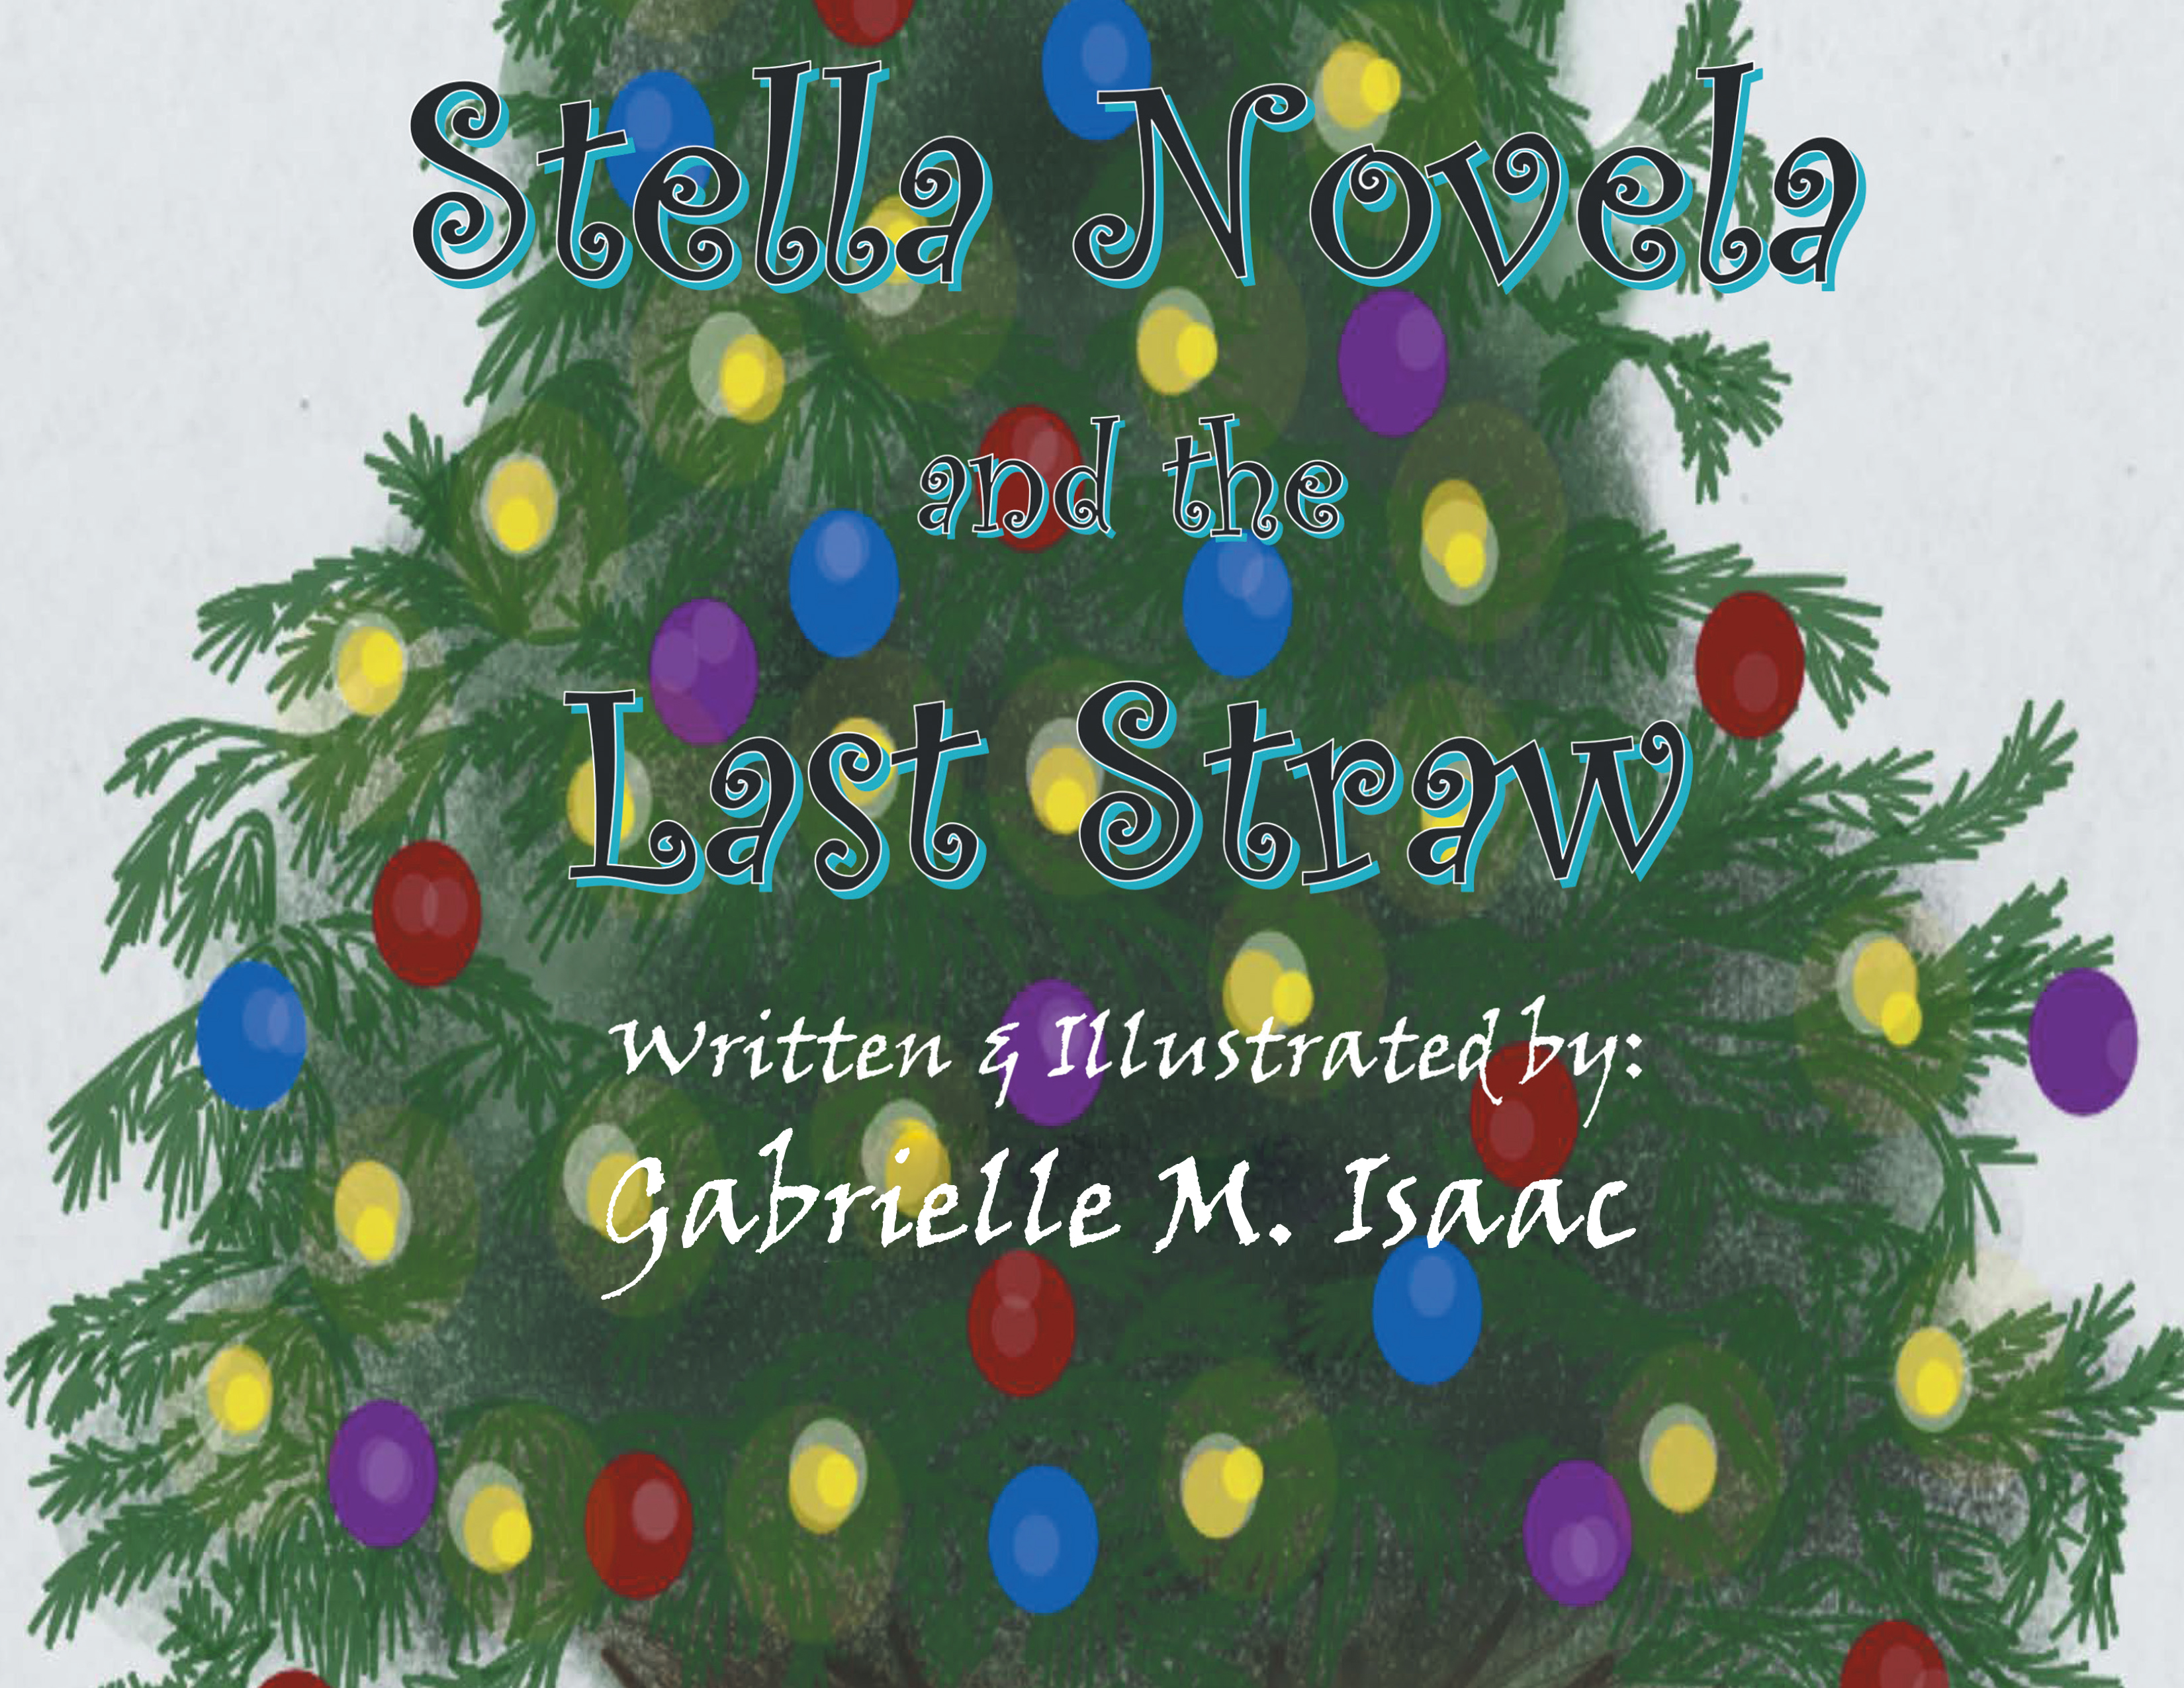 Author Gabrielle M. Isaac’s New Book, "Stella Novela and the Last Straw," Follows a Young Girl Who is Determined to Help Educate Others and Save the Earth for Christmas